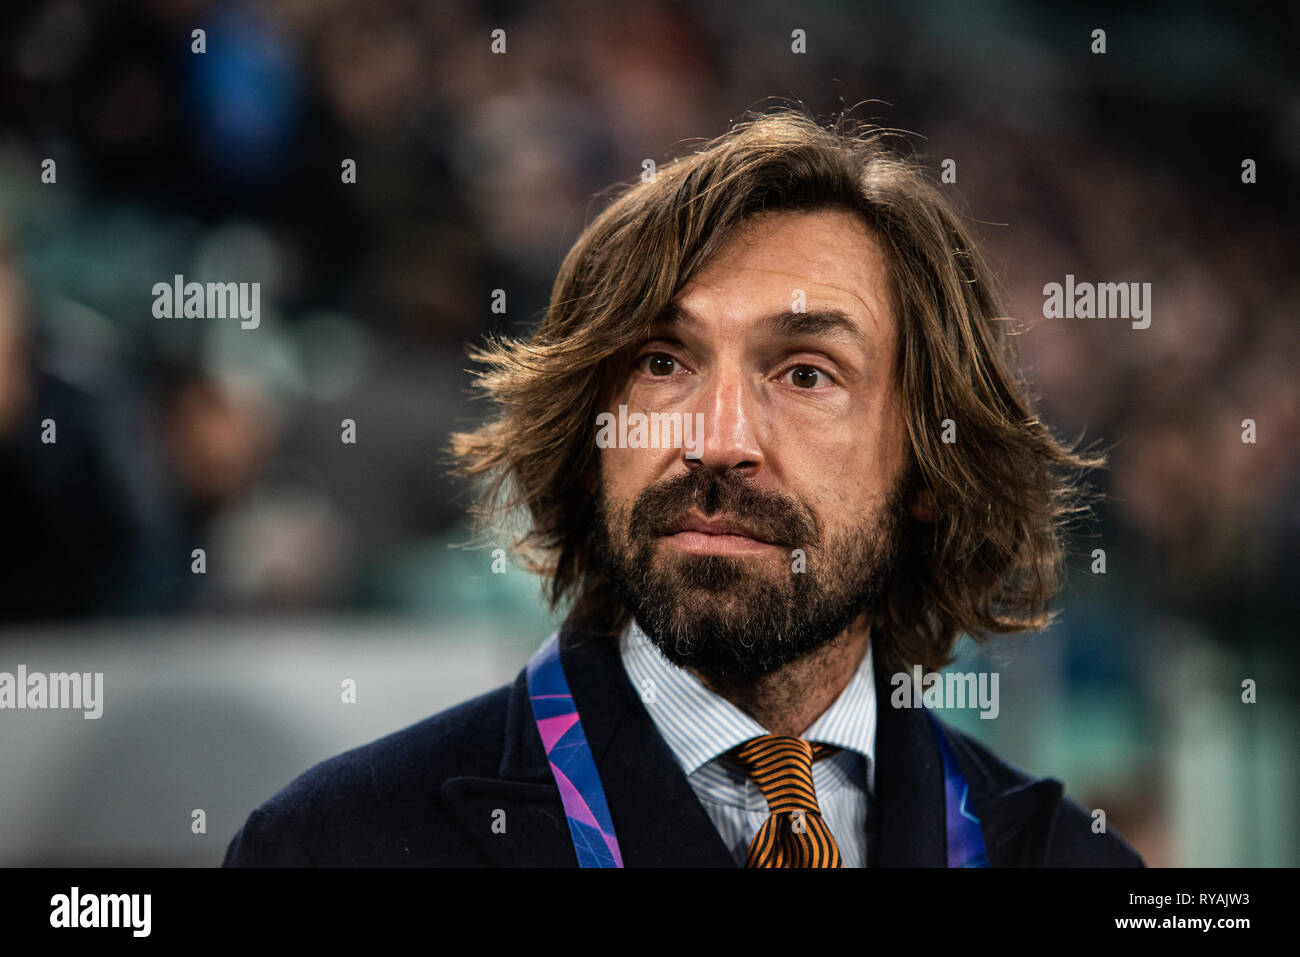 Turin, Italy. 12th Mar 2019. Andrea Pirlo during the League match: Juventus FC vs Atletico Madrid. Juvenwus won 3-0 in Turin, Italy. , . Credit: Alberto Gandolfo/Alamy Live News Stock Photo